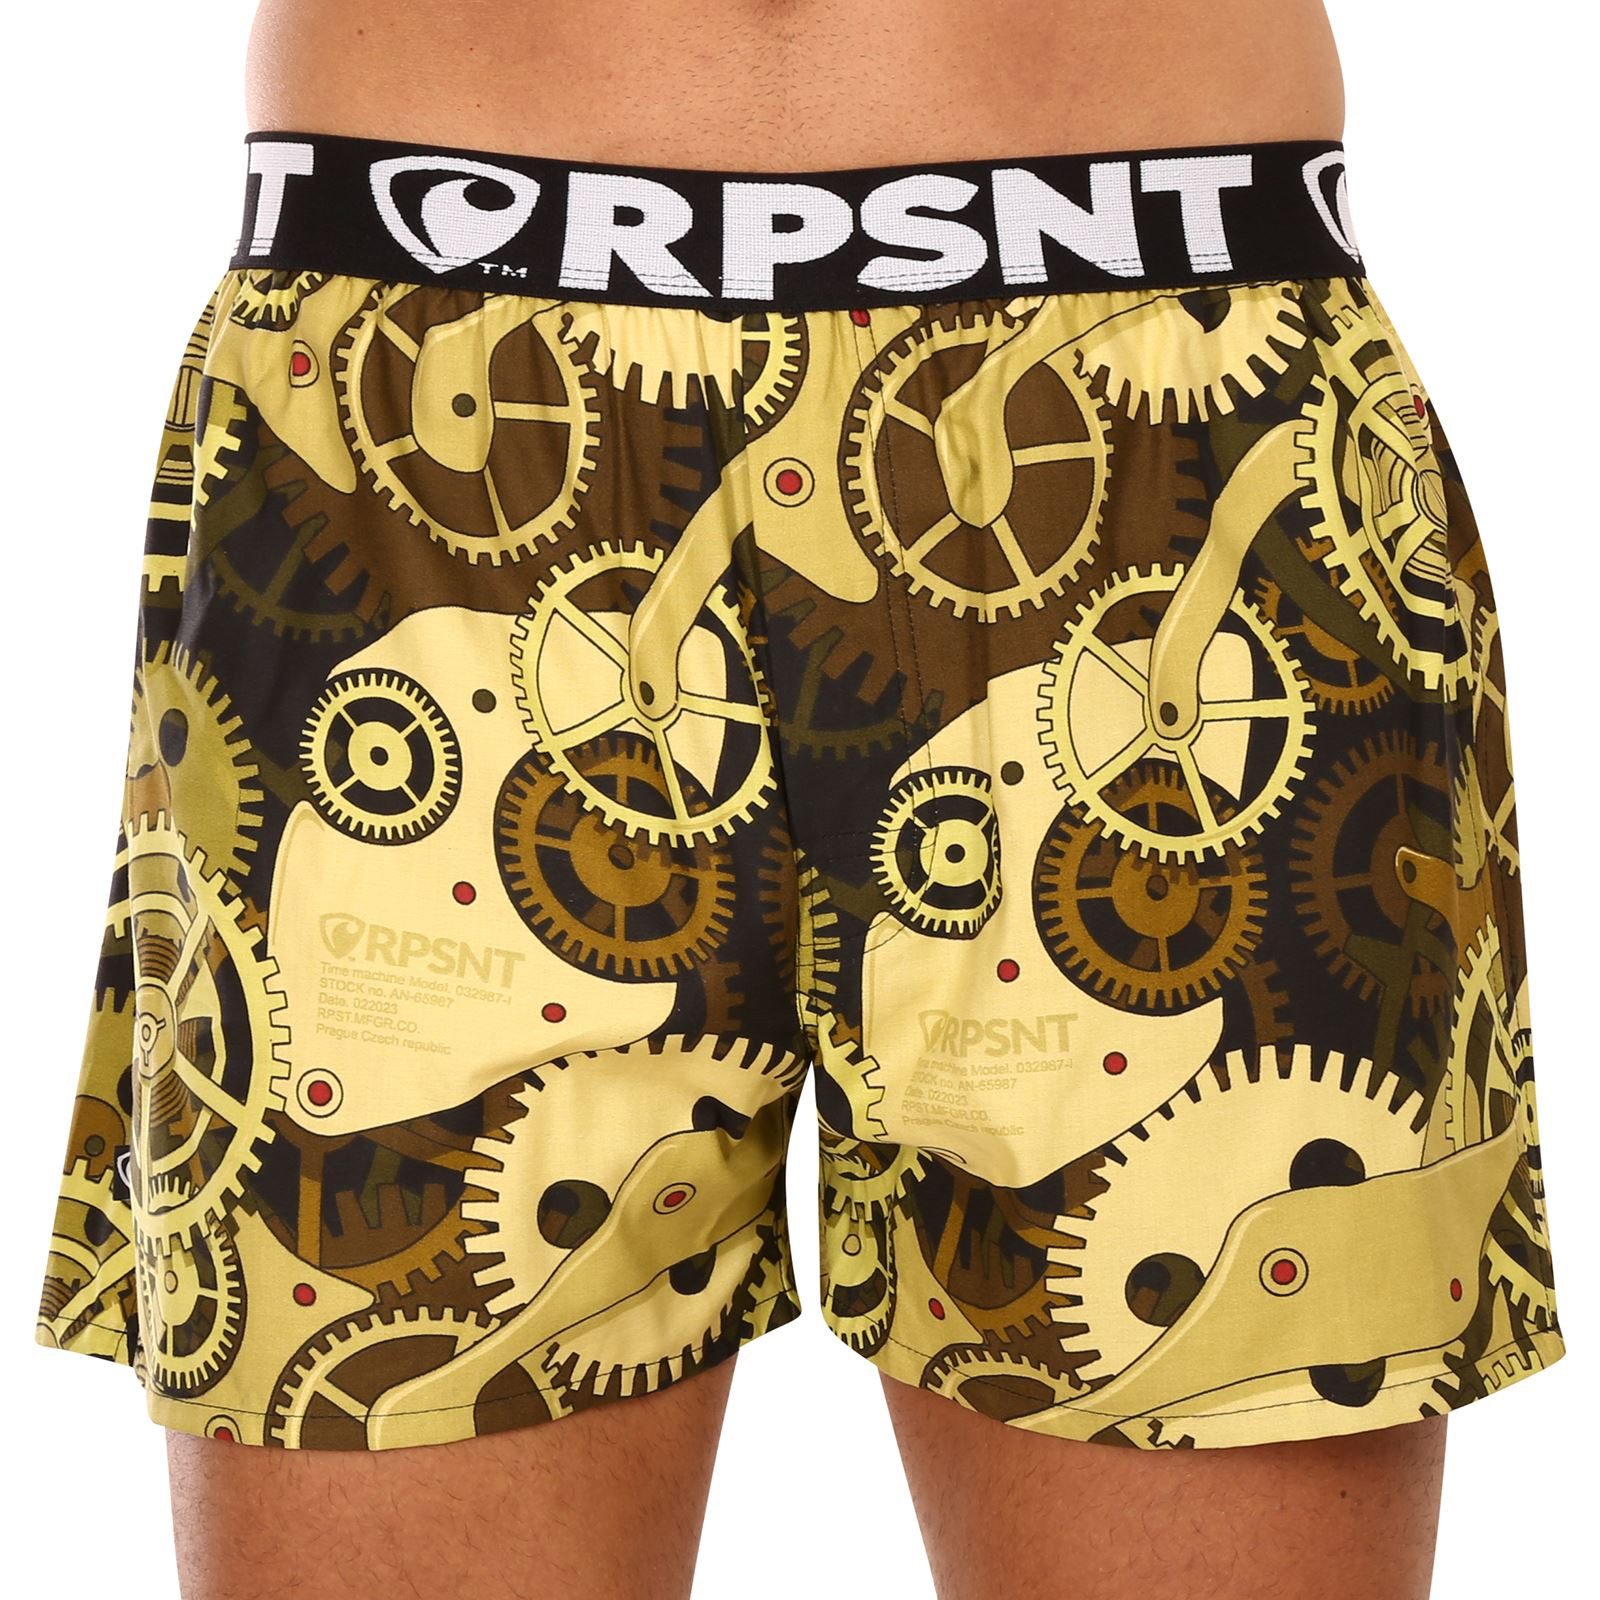 Men's shorts Represent exclusive Mike time machine